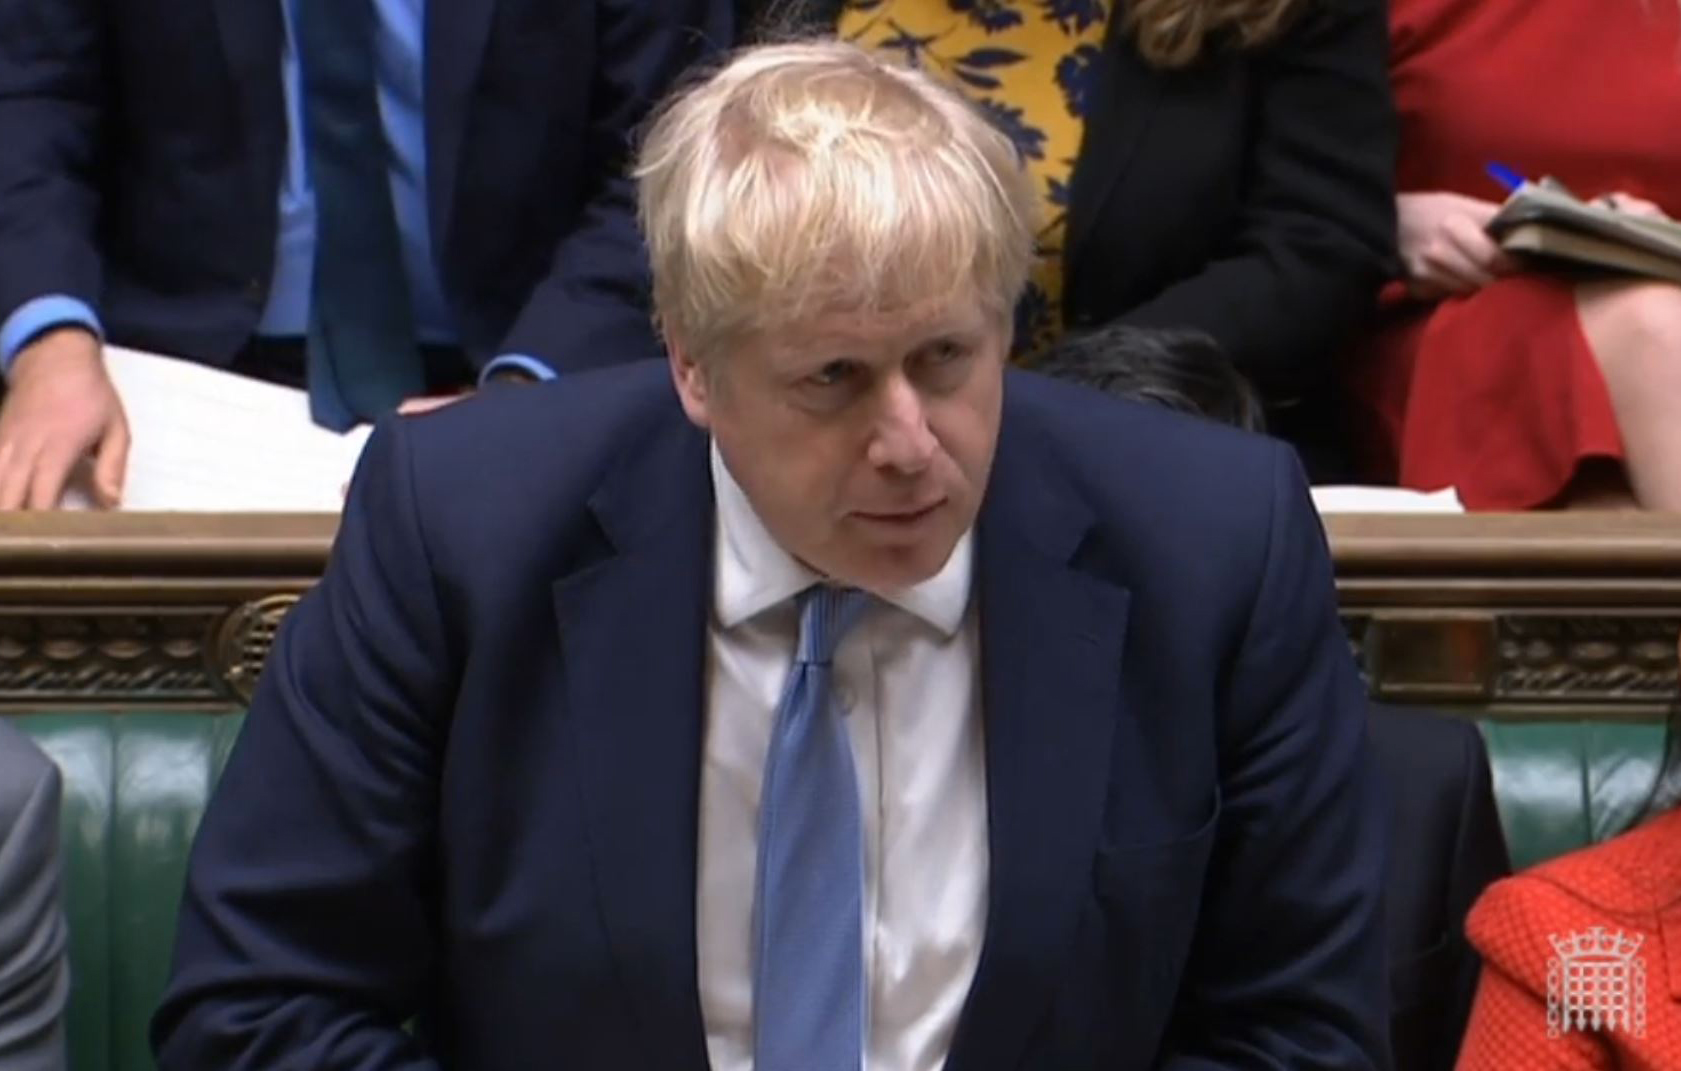 Prime Minister Boris Johnson delivers a statement to MPs in the House of Commons, London, England, on the Sue Gray report on January 31